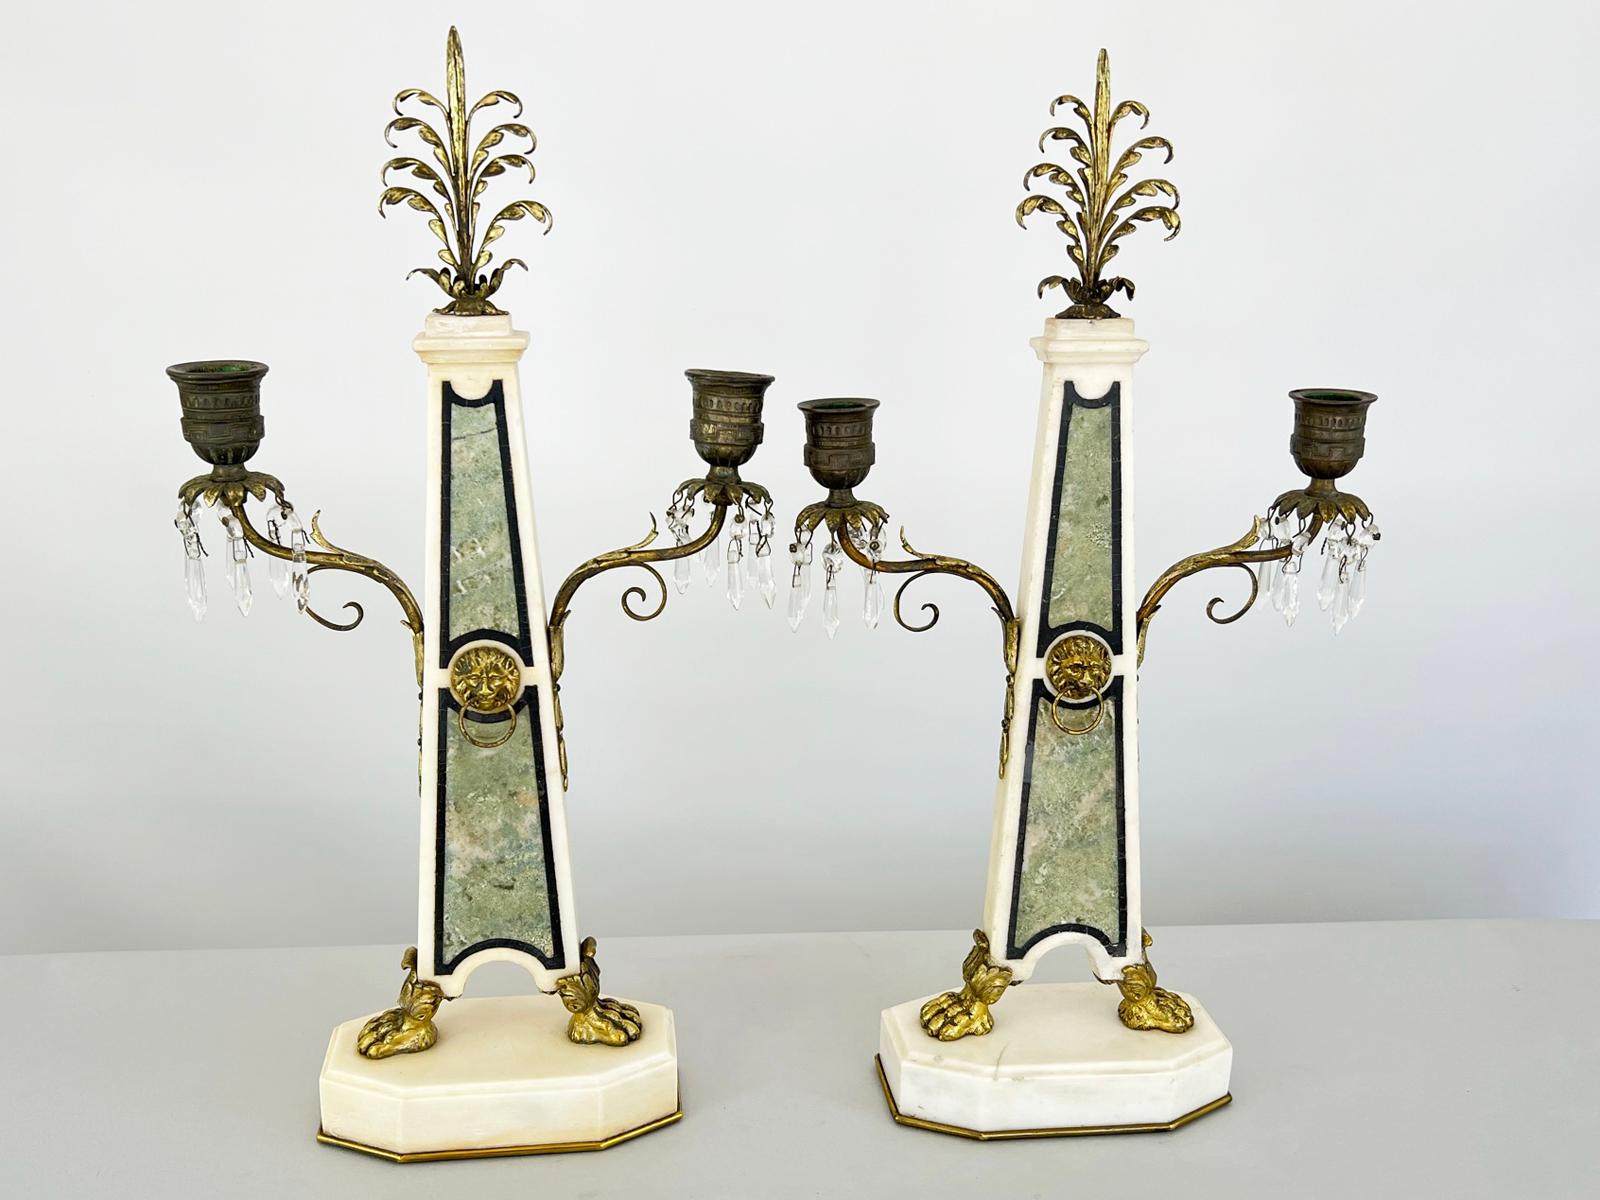 Pair of fine candelabra from the Napoleon III period. Each a tapered pilaster of white marble inlaid with verte and noir stone, set upon an octagonal, graduated plinth. A gilt-bronze lion's mask and ring decorate the center of each column,